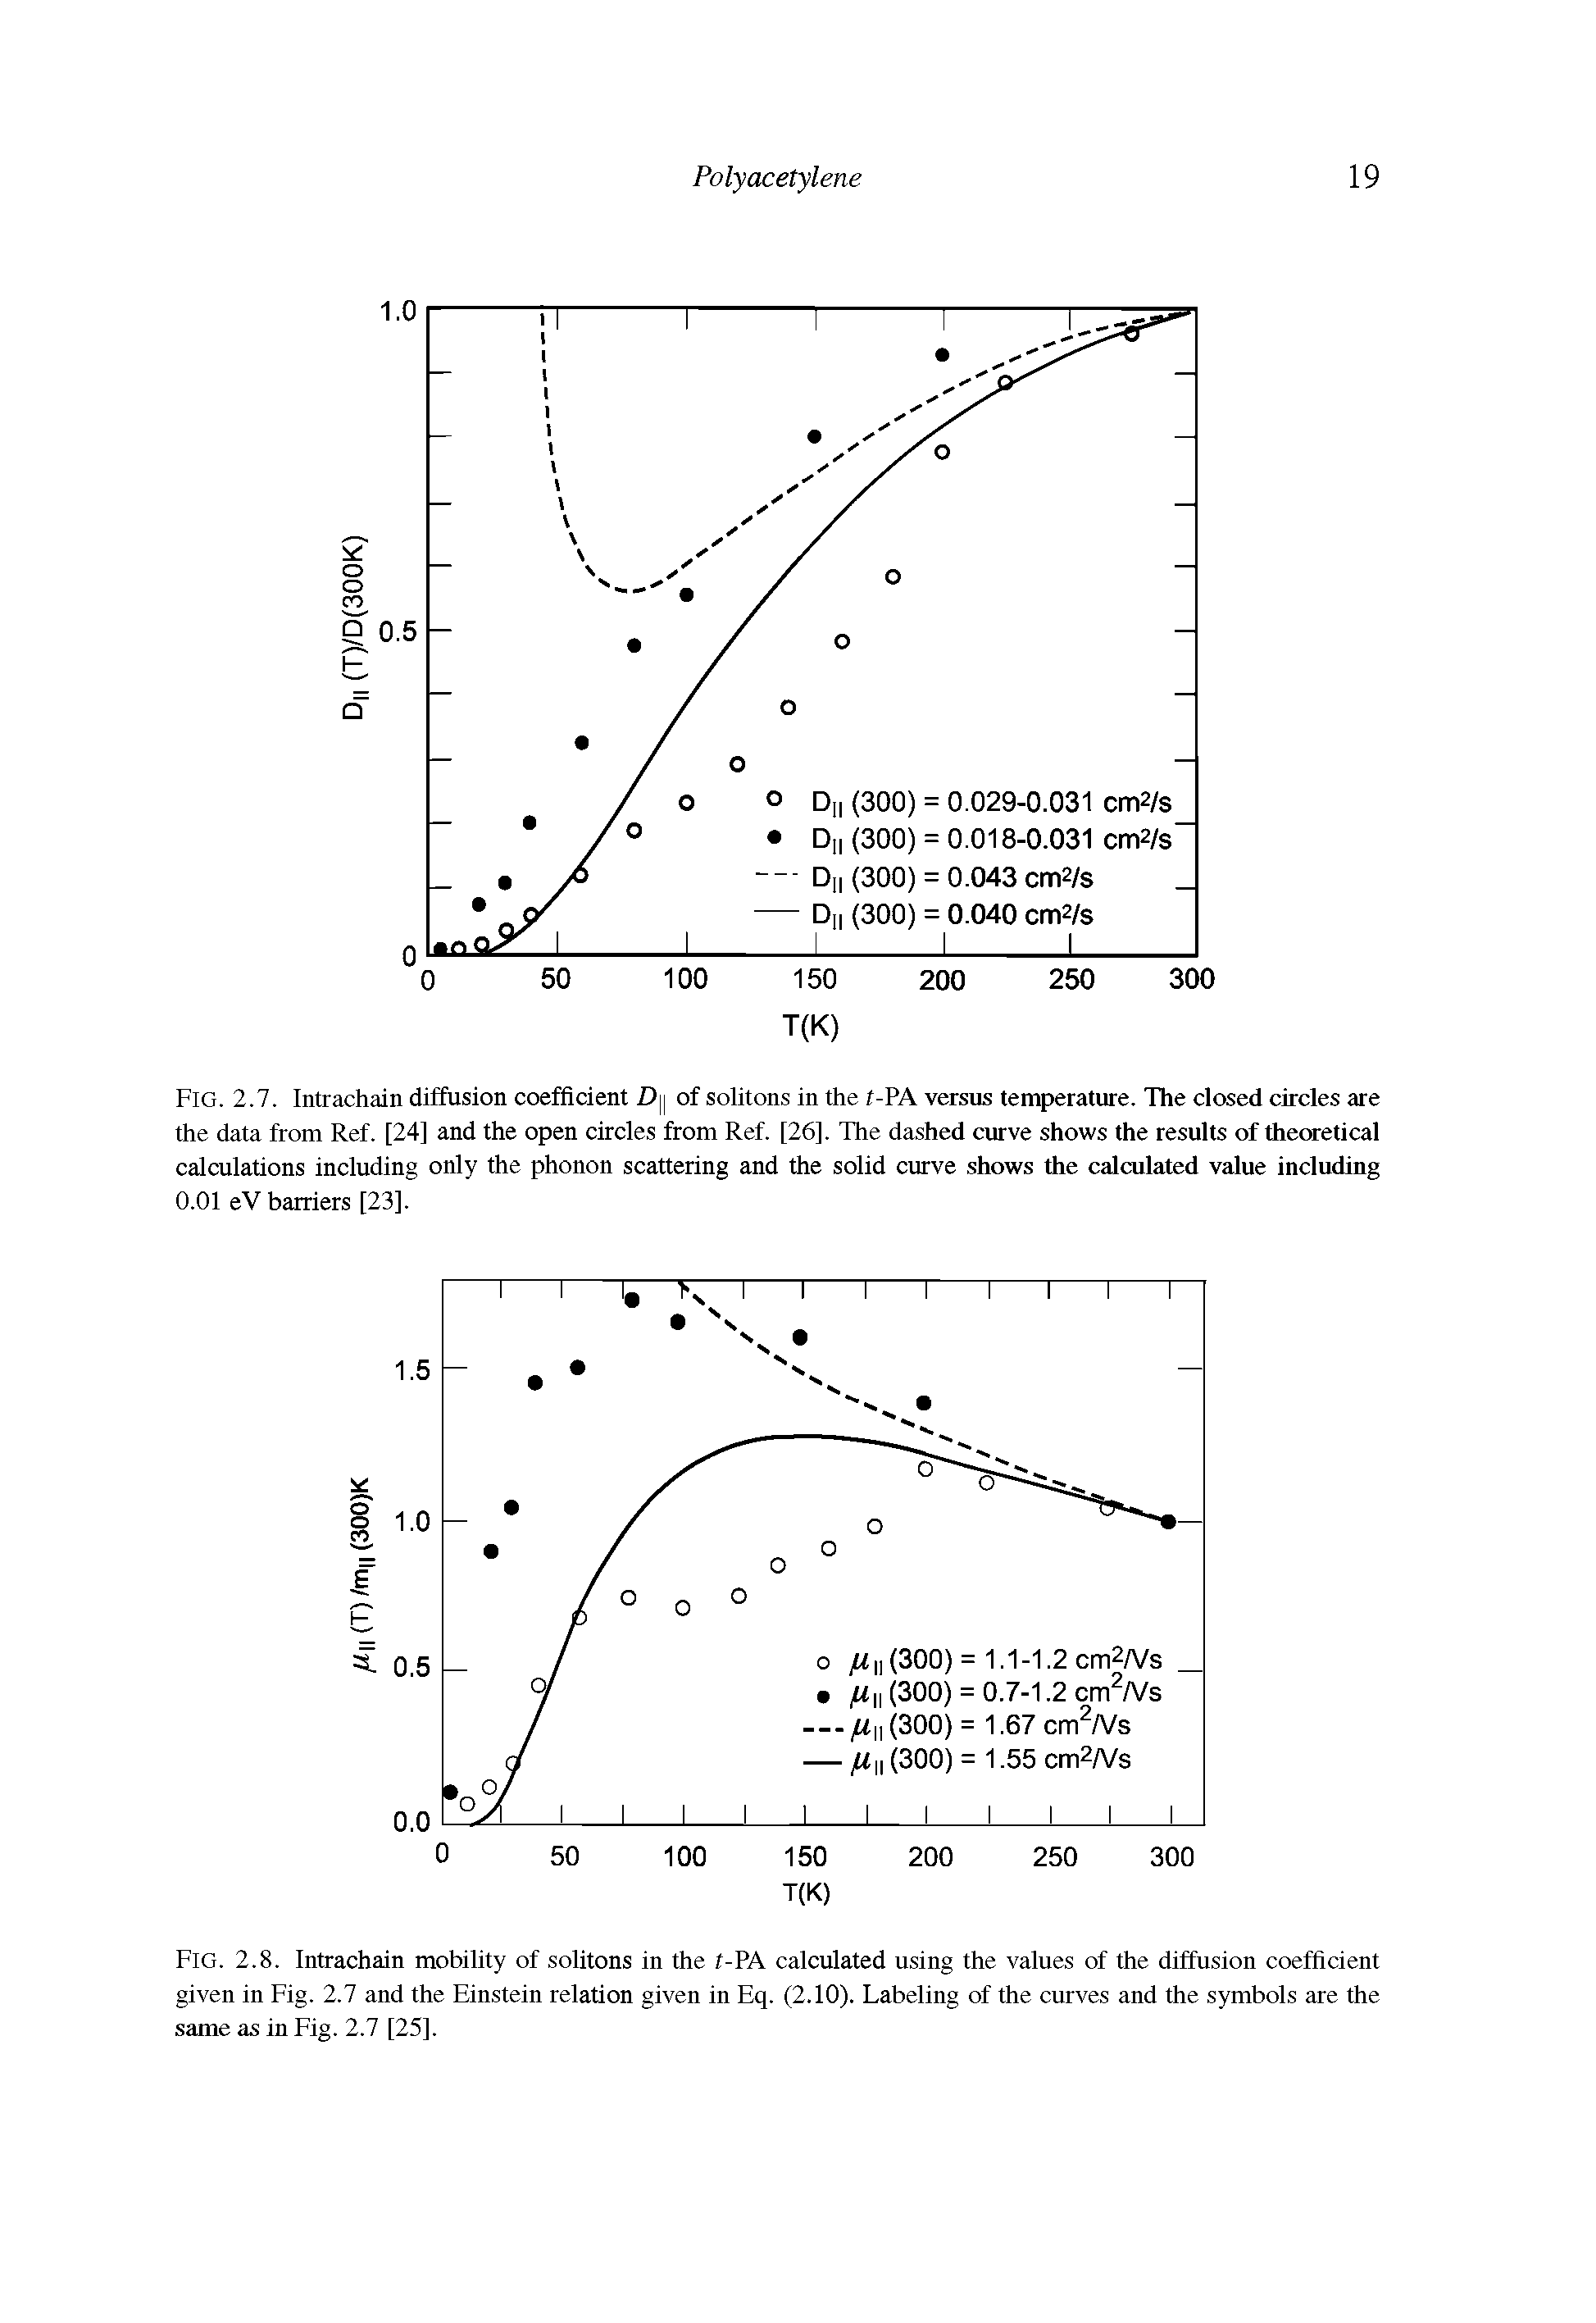 Fig. 2.8. Intrachain mobility of solitons in the t-PA calculated using the values of the diffusion coefficient given in Fig. 2.7 and the Einstein relation given in Eq. (2.10). Labeling of the curves and the symbols are the same as in Fig. 2.7 [25],...